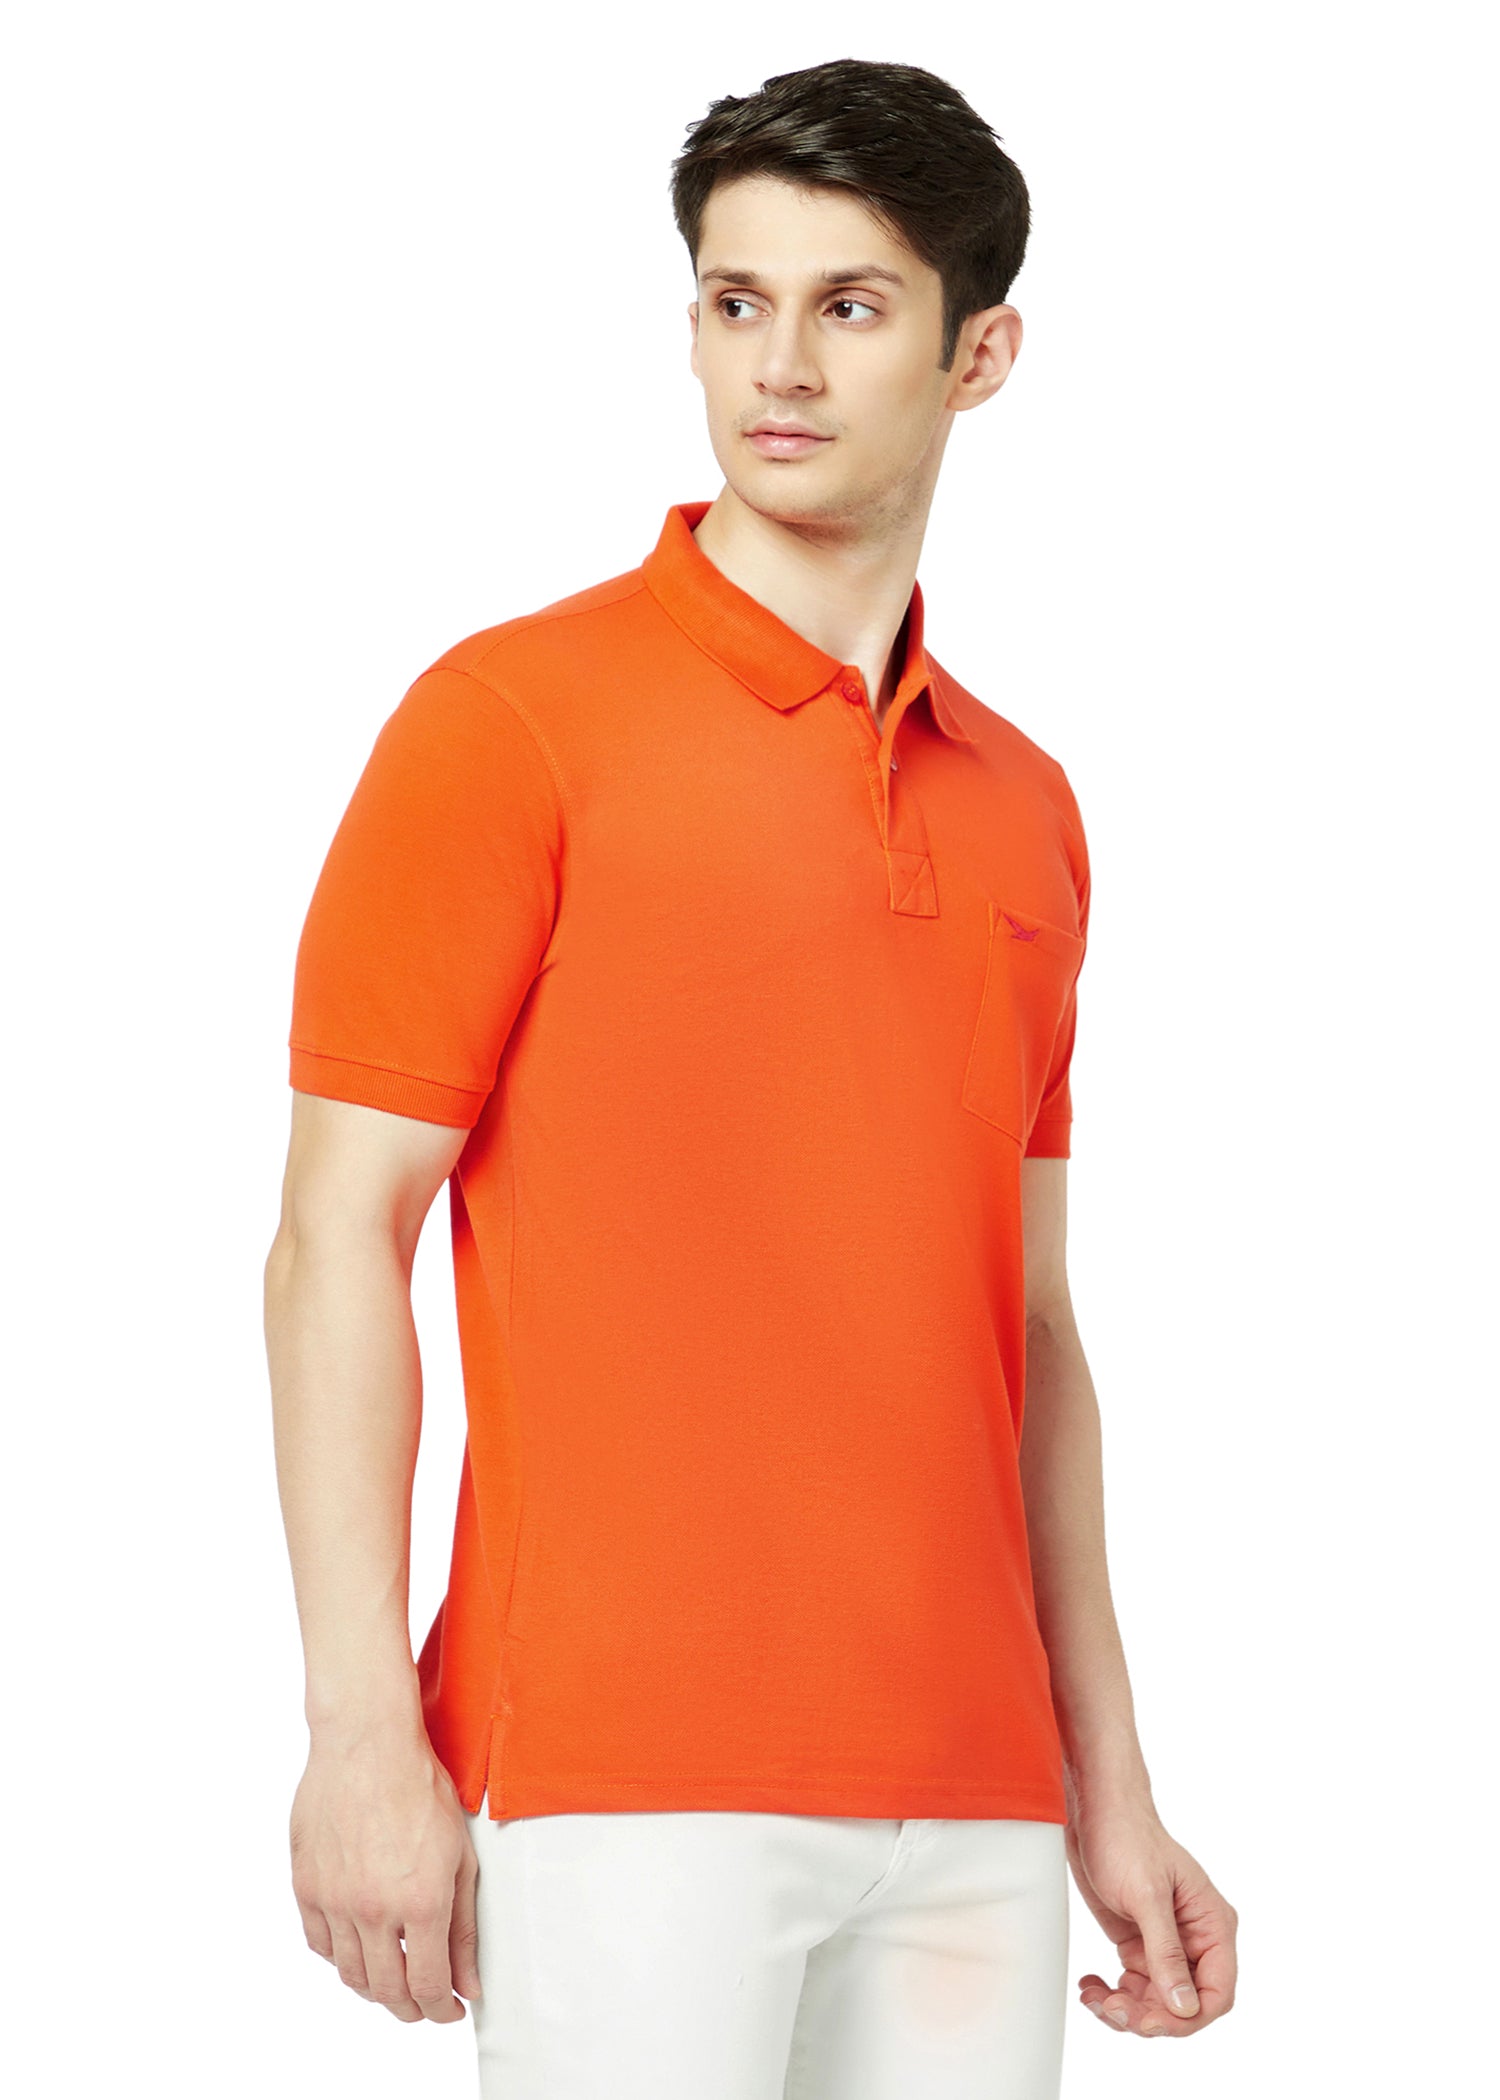 Hiflyers Men'S Solid Regular Fit Polo T-Shirt With Pocket -Orange